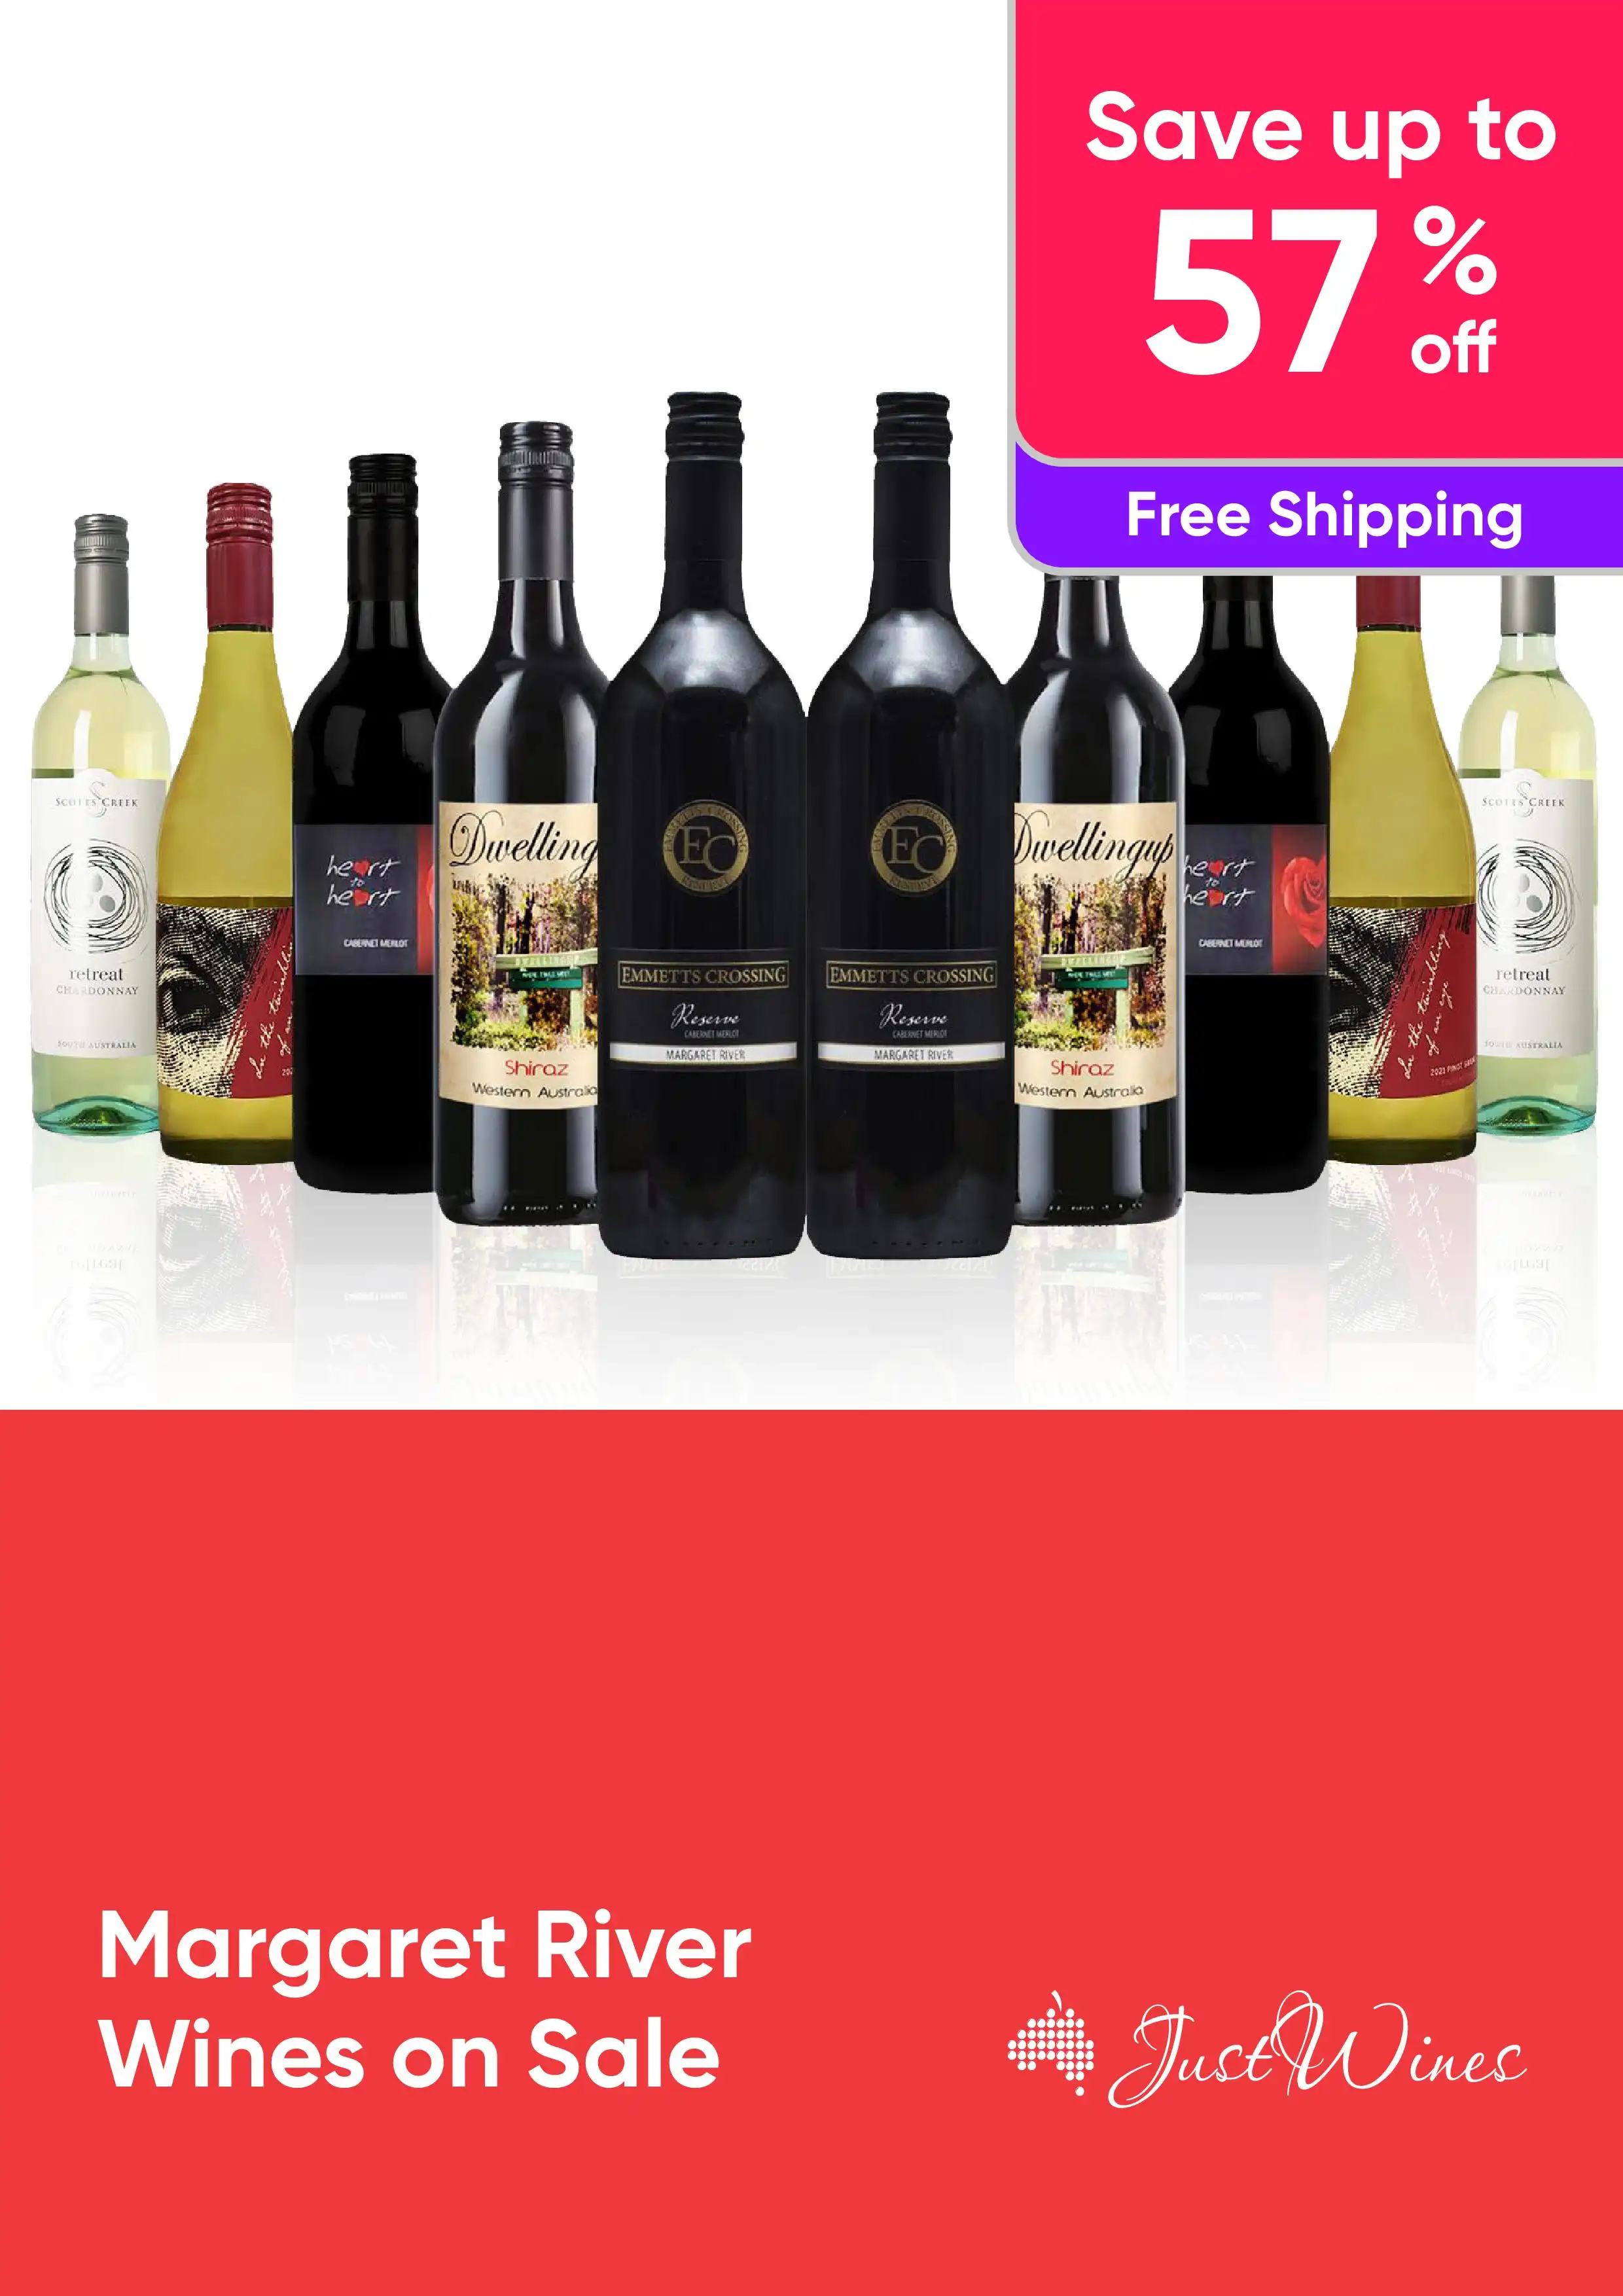 Margaret River Wines on Sale! - Save up to 57% with Free Shipping